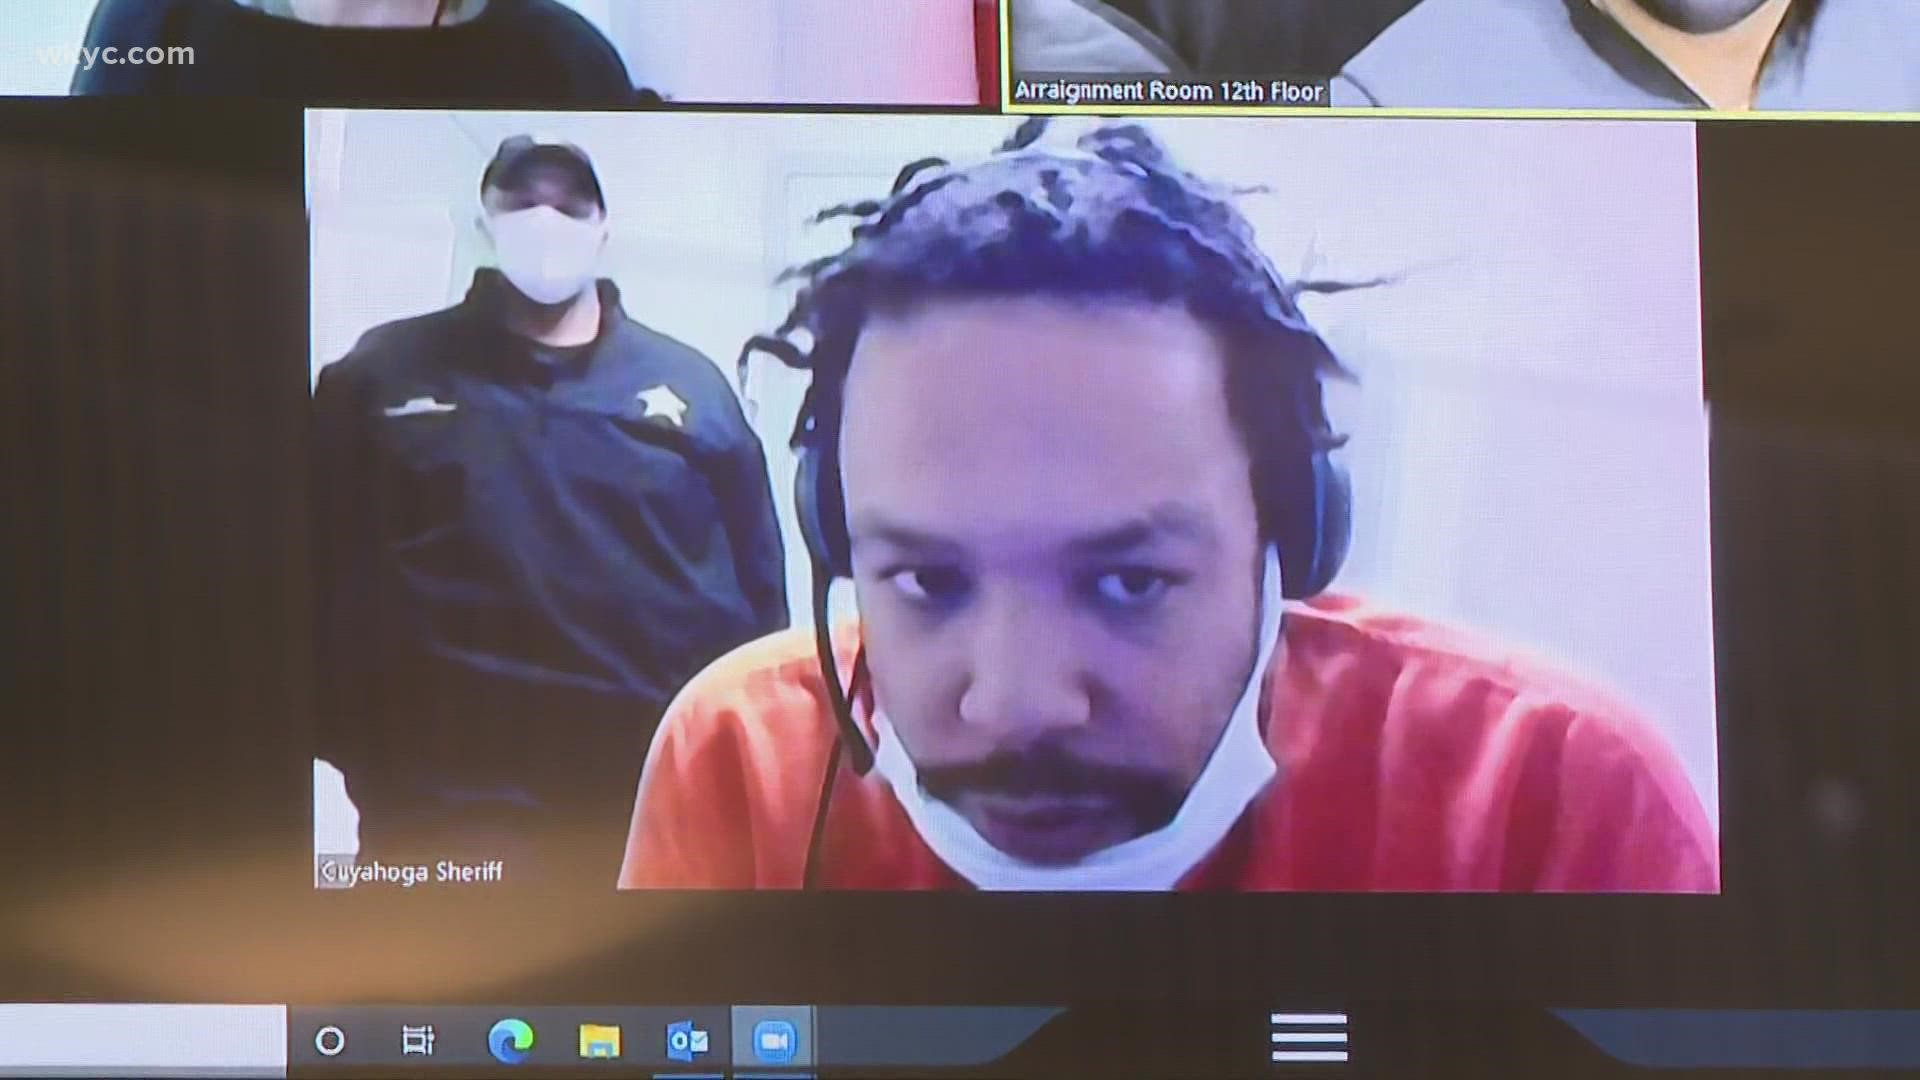 Anthony Butler Jr. appeared via video for arraignment in Cuyahoga County Common Pleas Court.